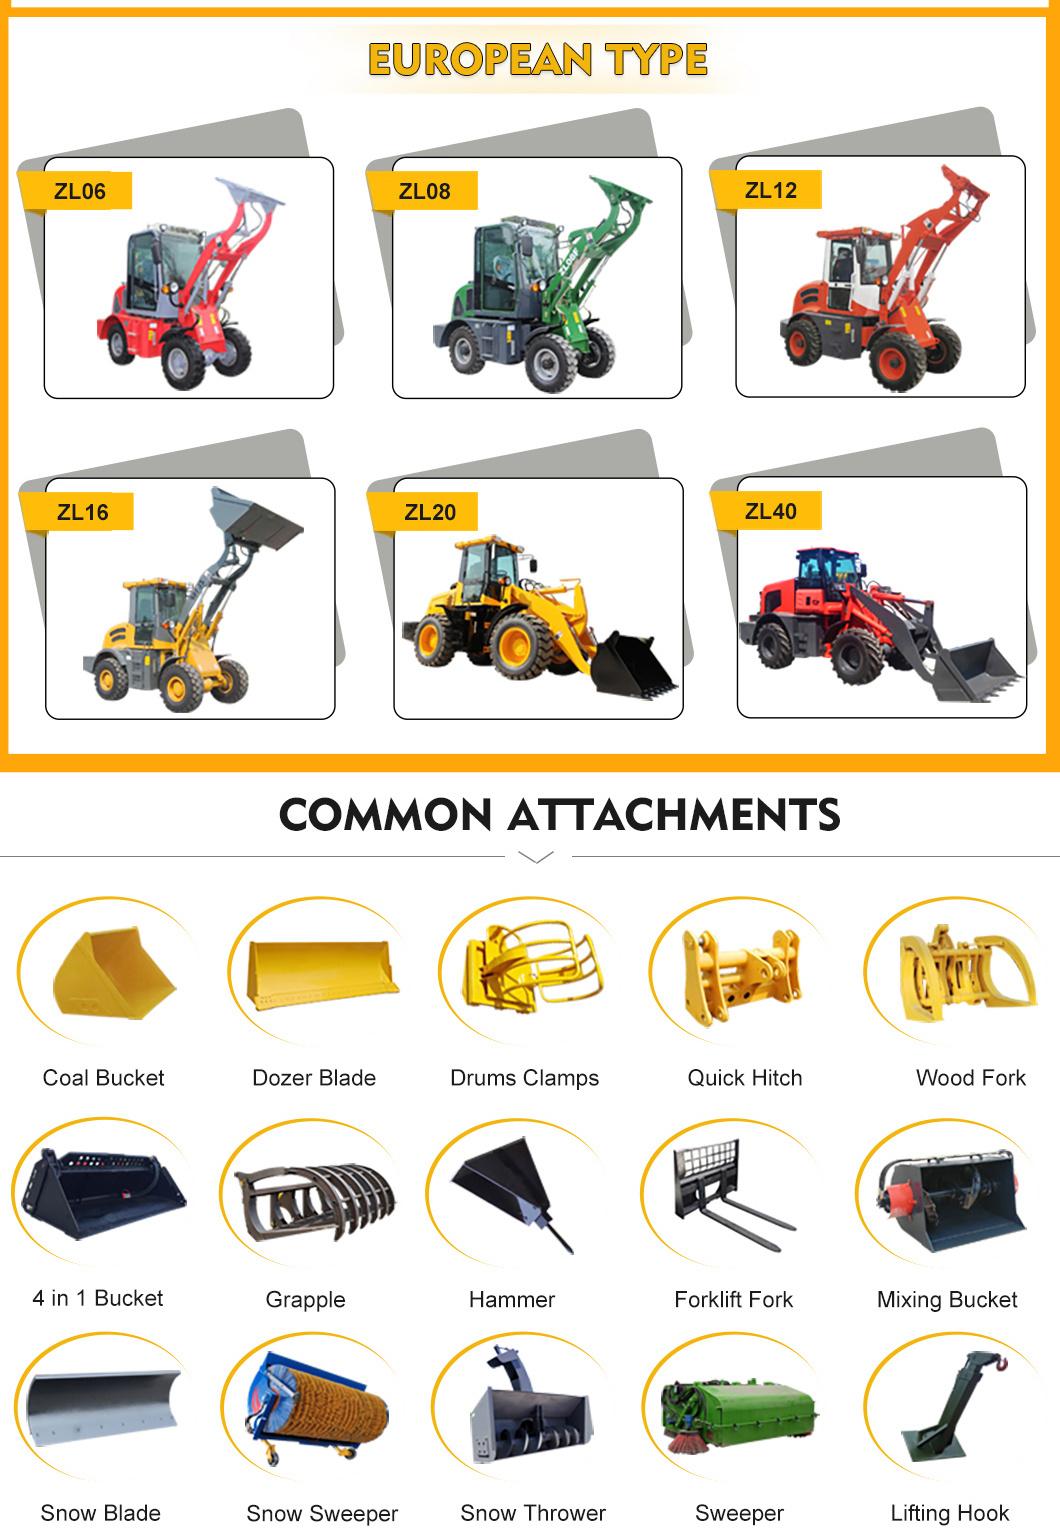 Intelligent Control Articulated 908 Wheel Loader Mini Loader for Sale Philippines